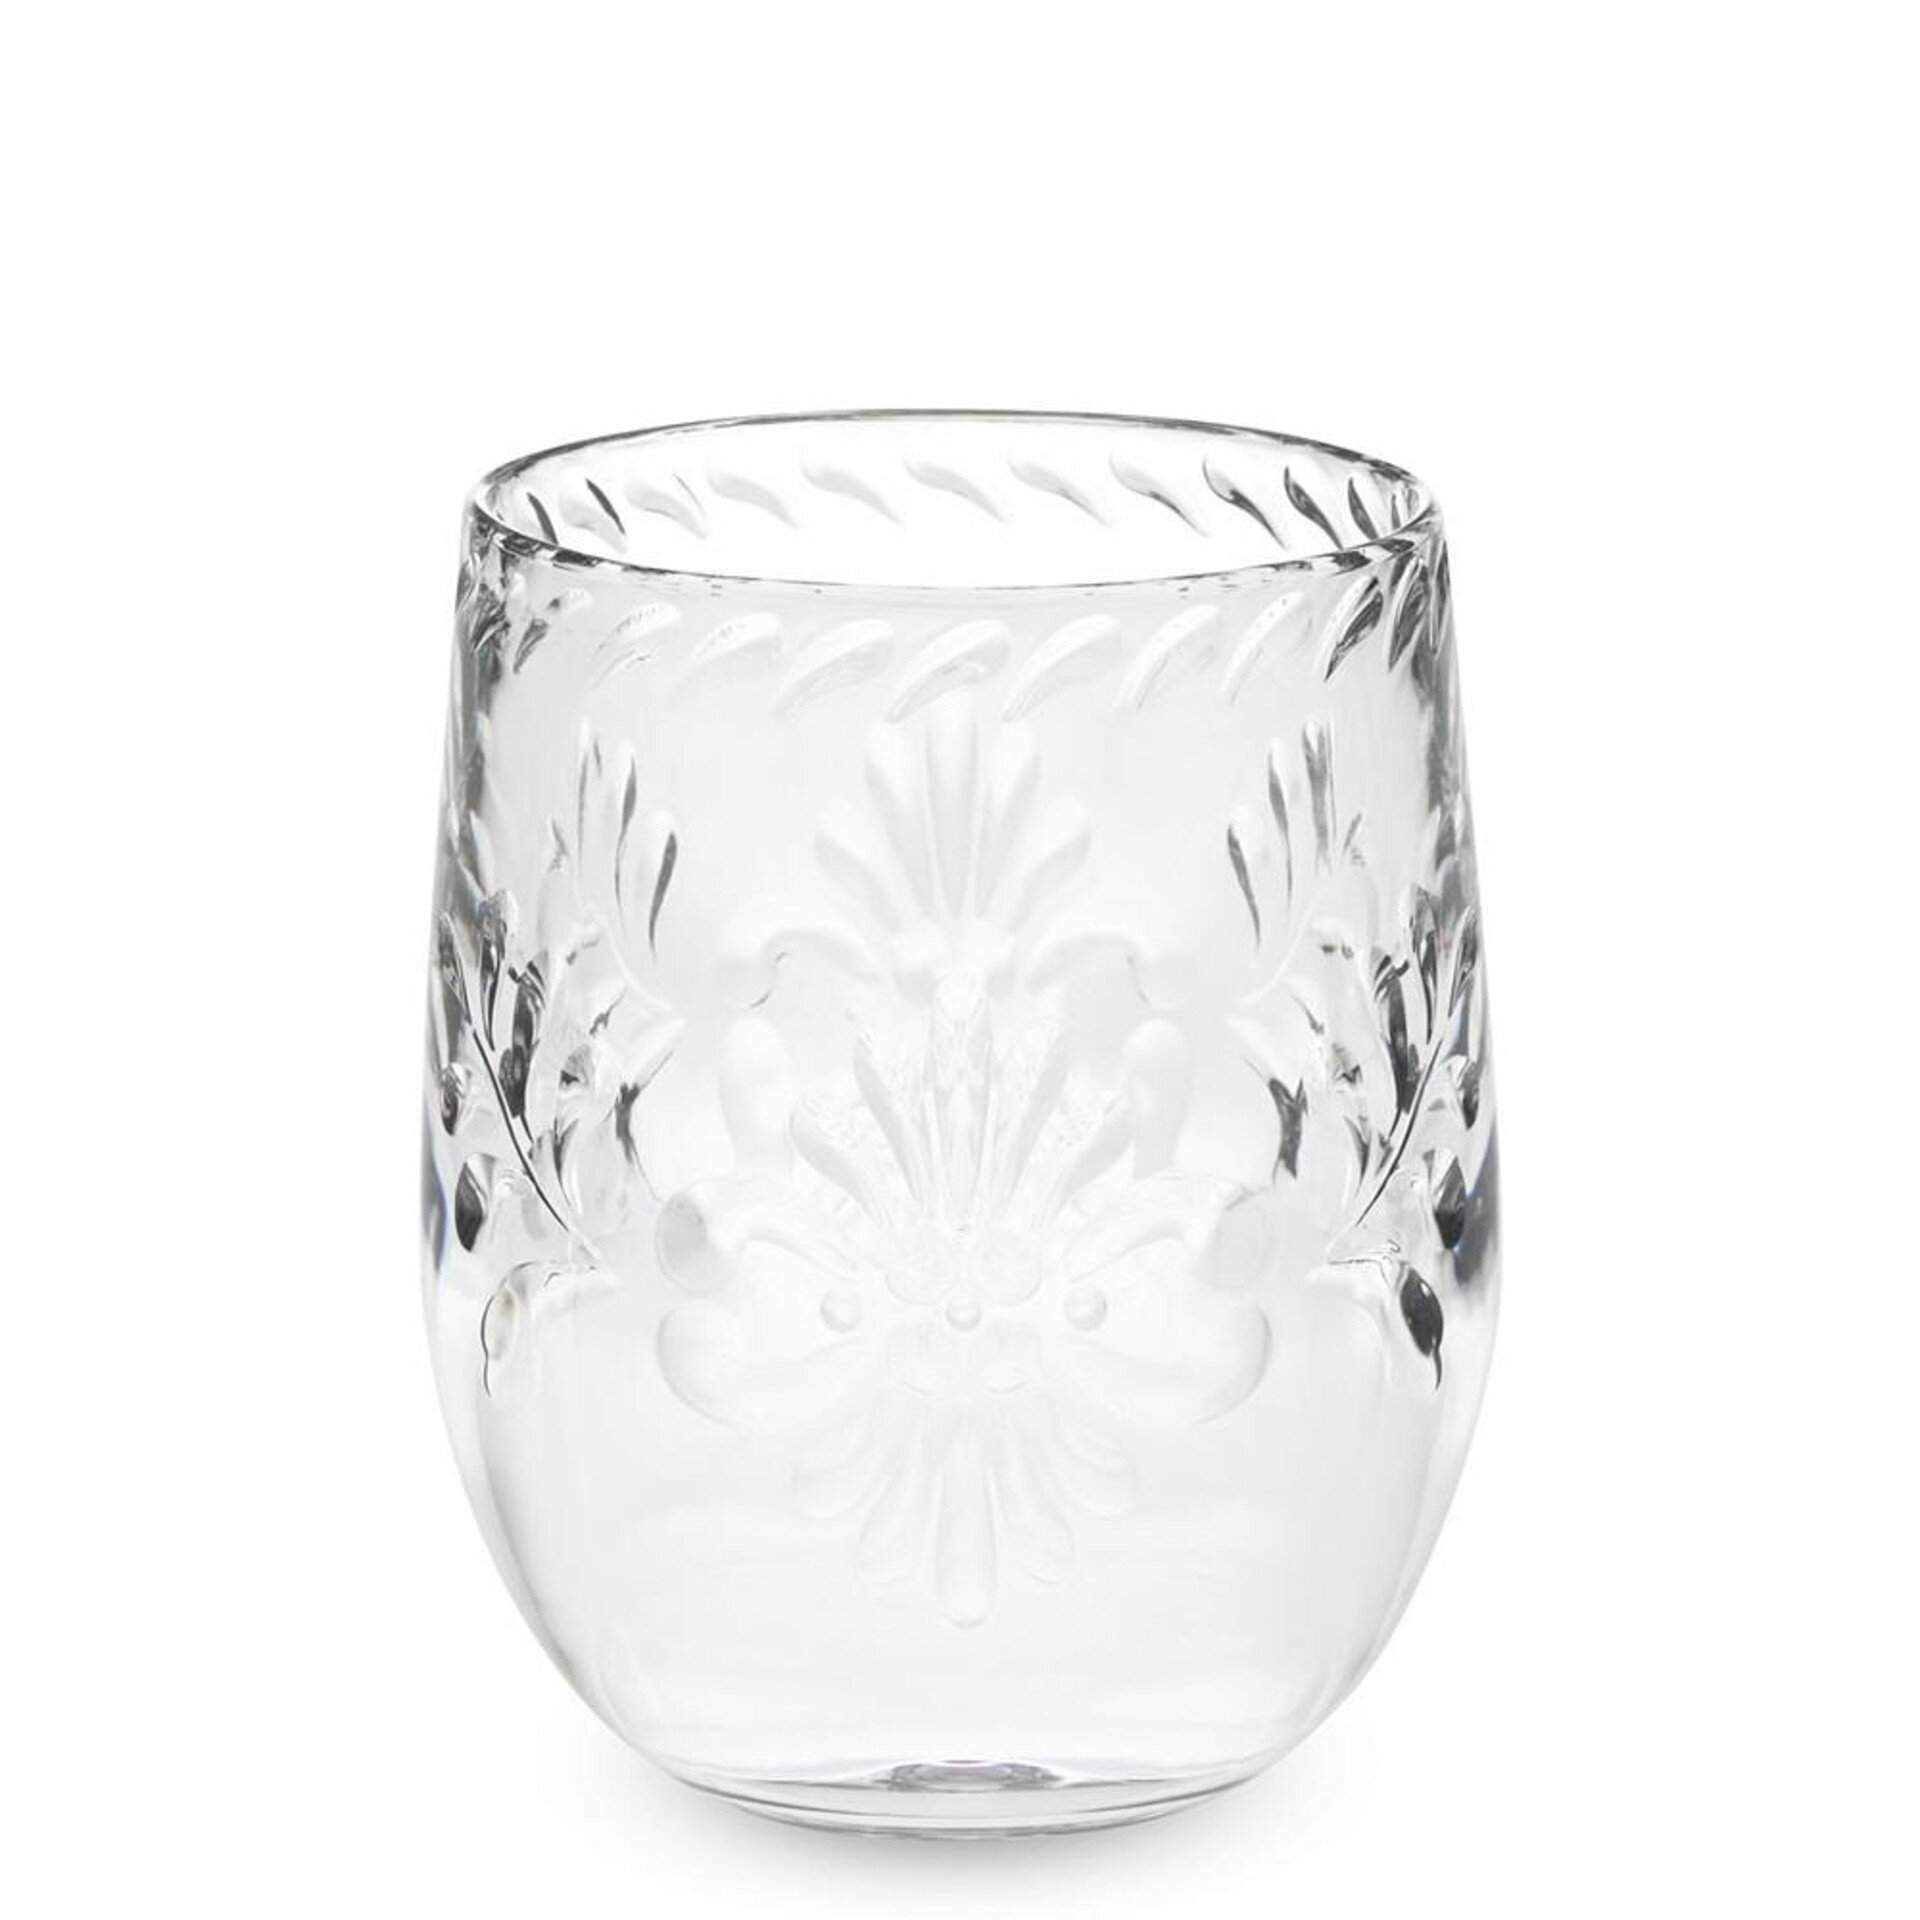 sonora-etched-stemless-wine-glasses-hero-new-z.jpg